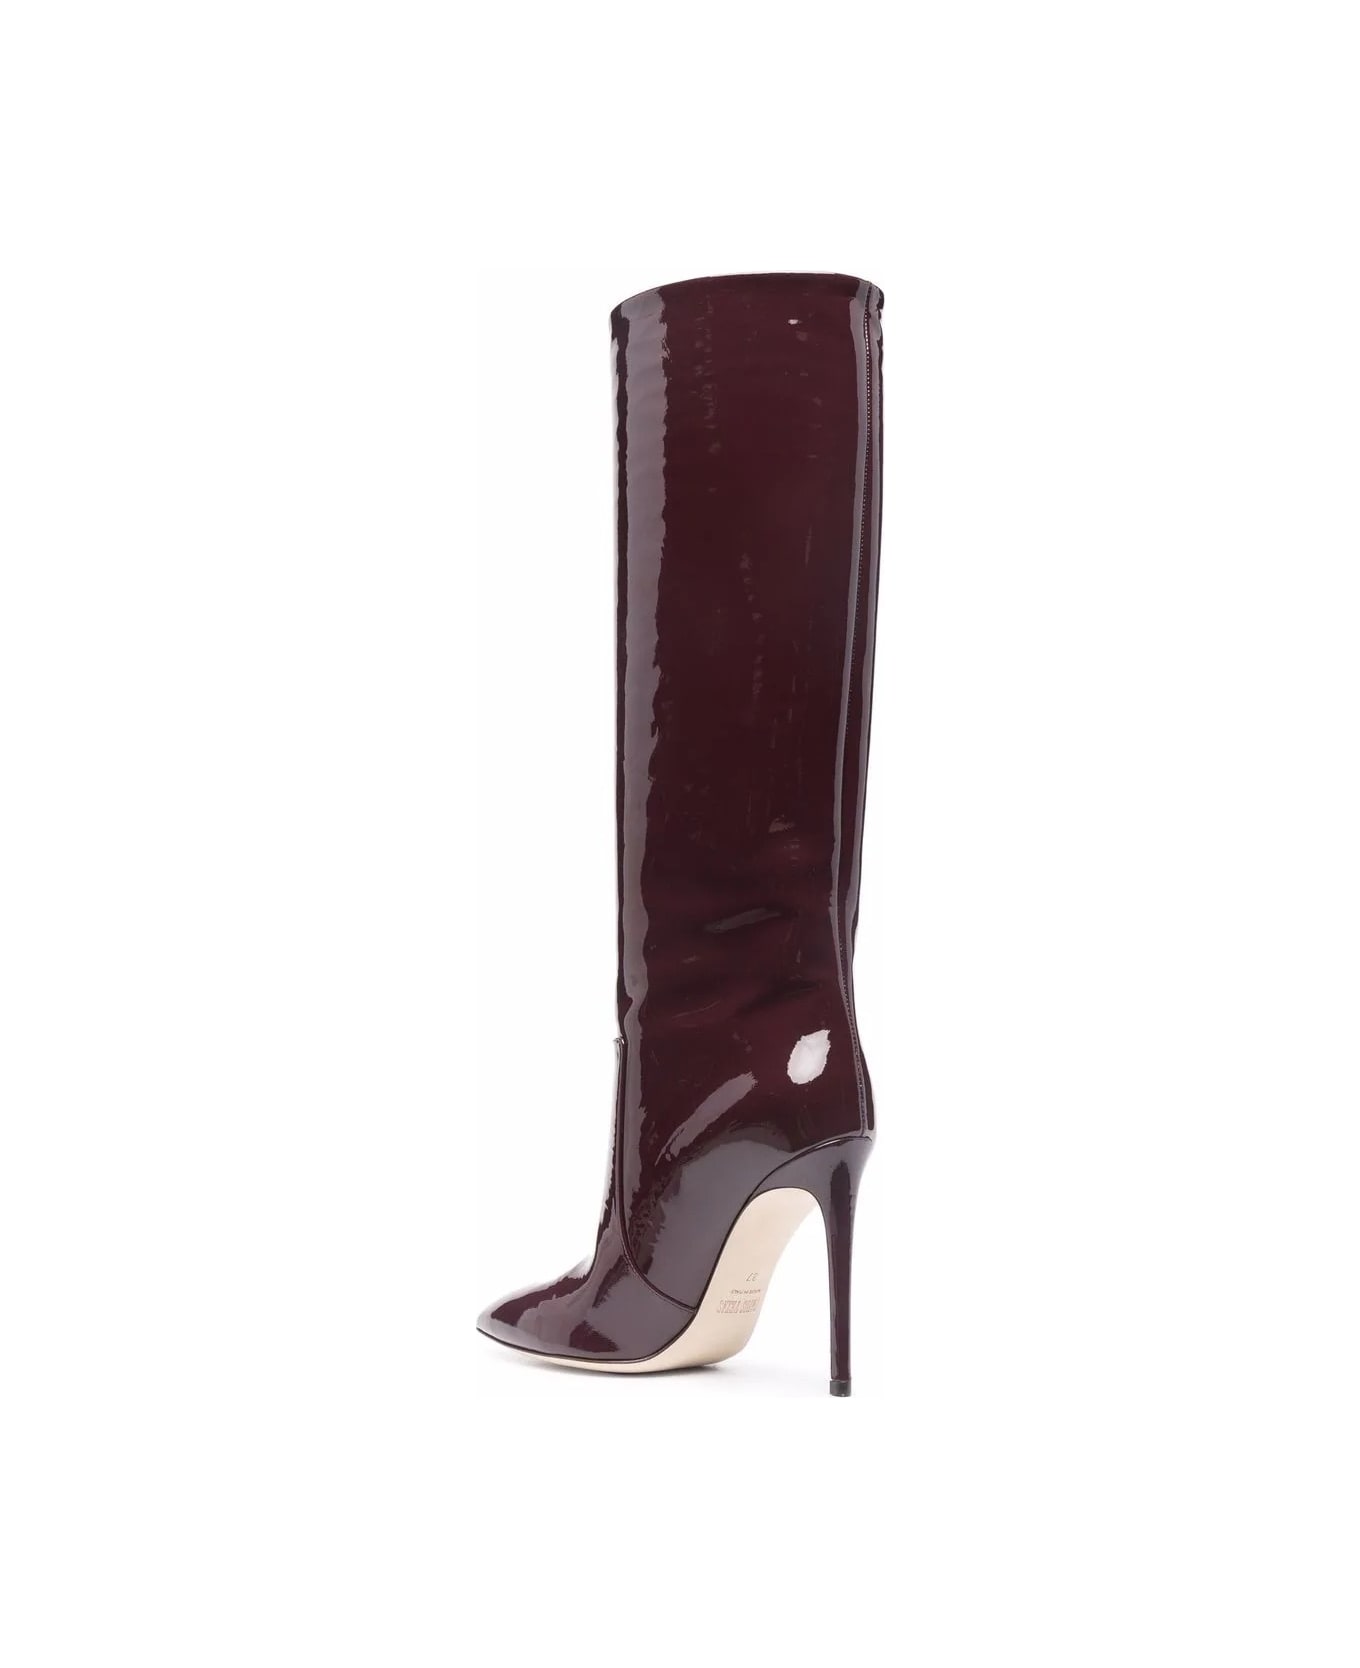 Paris Texas 105 Stiletto Boot In Burgundy Patent Leather - Red ブーツ